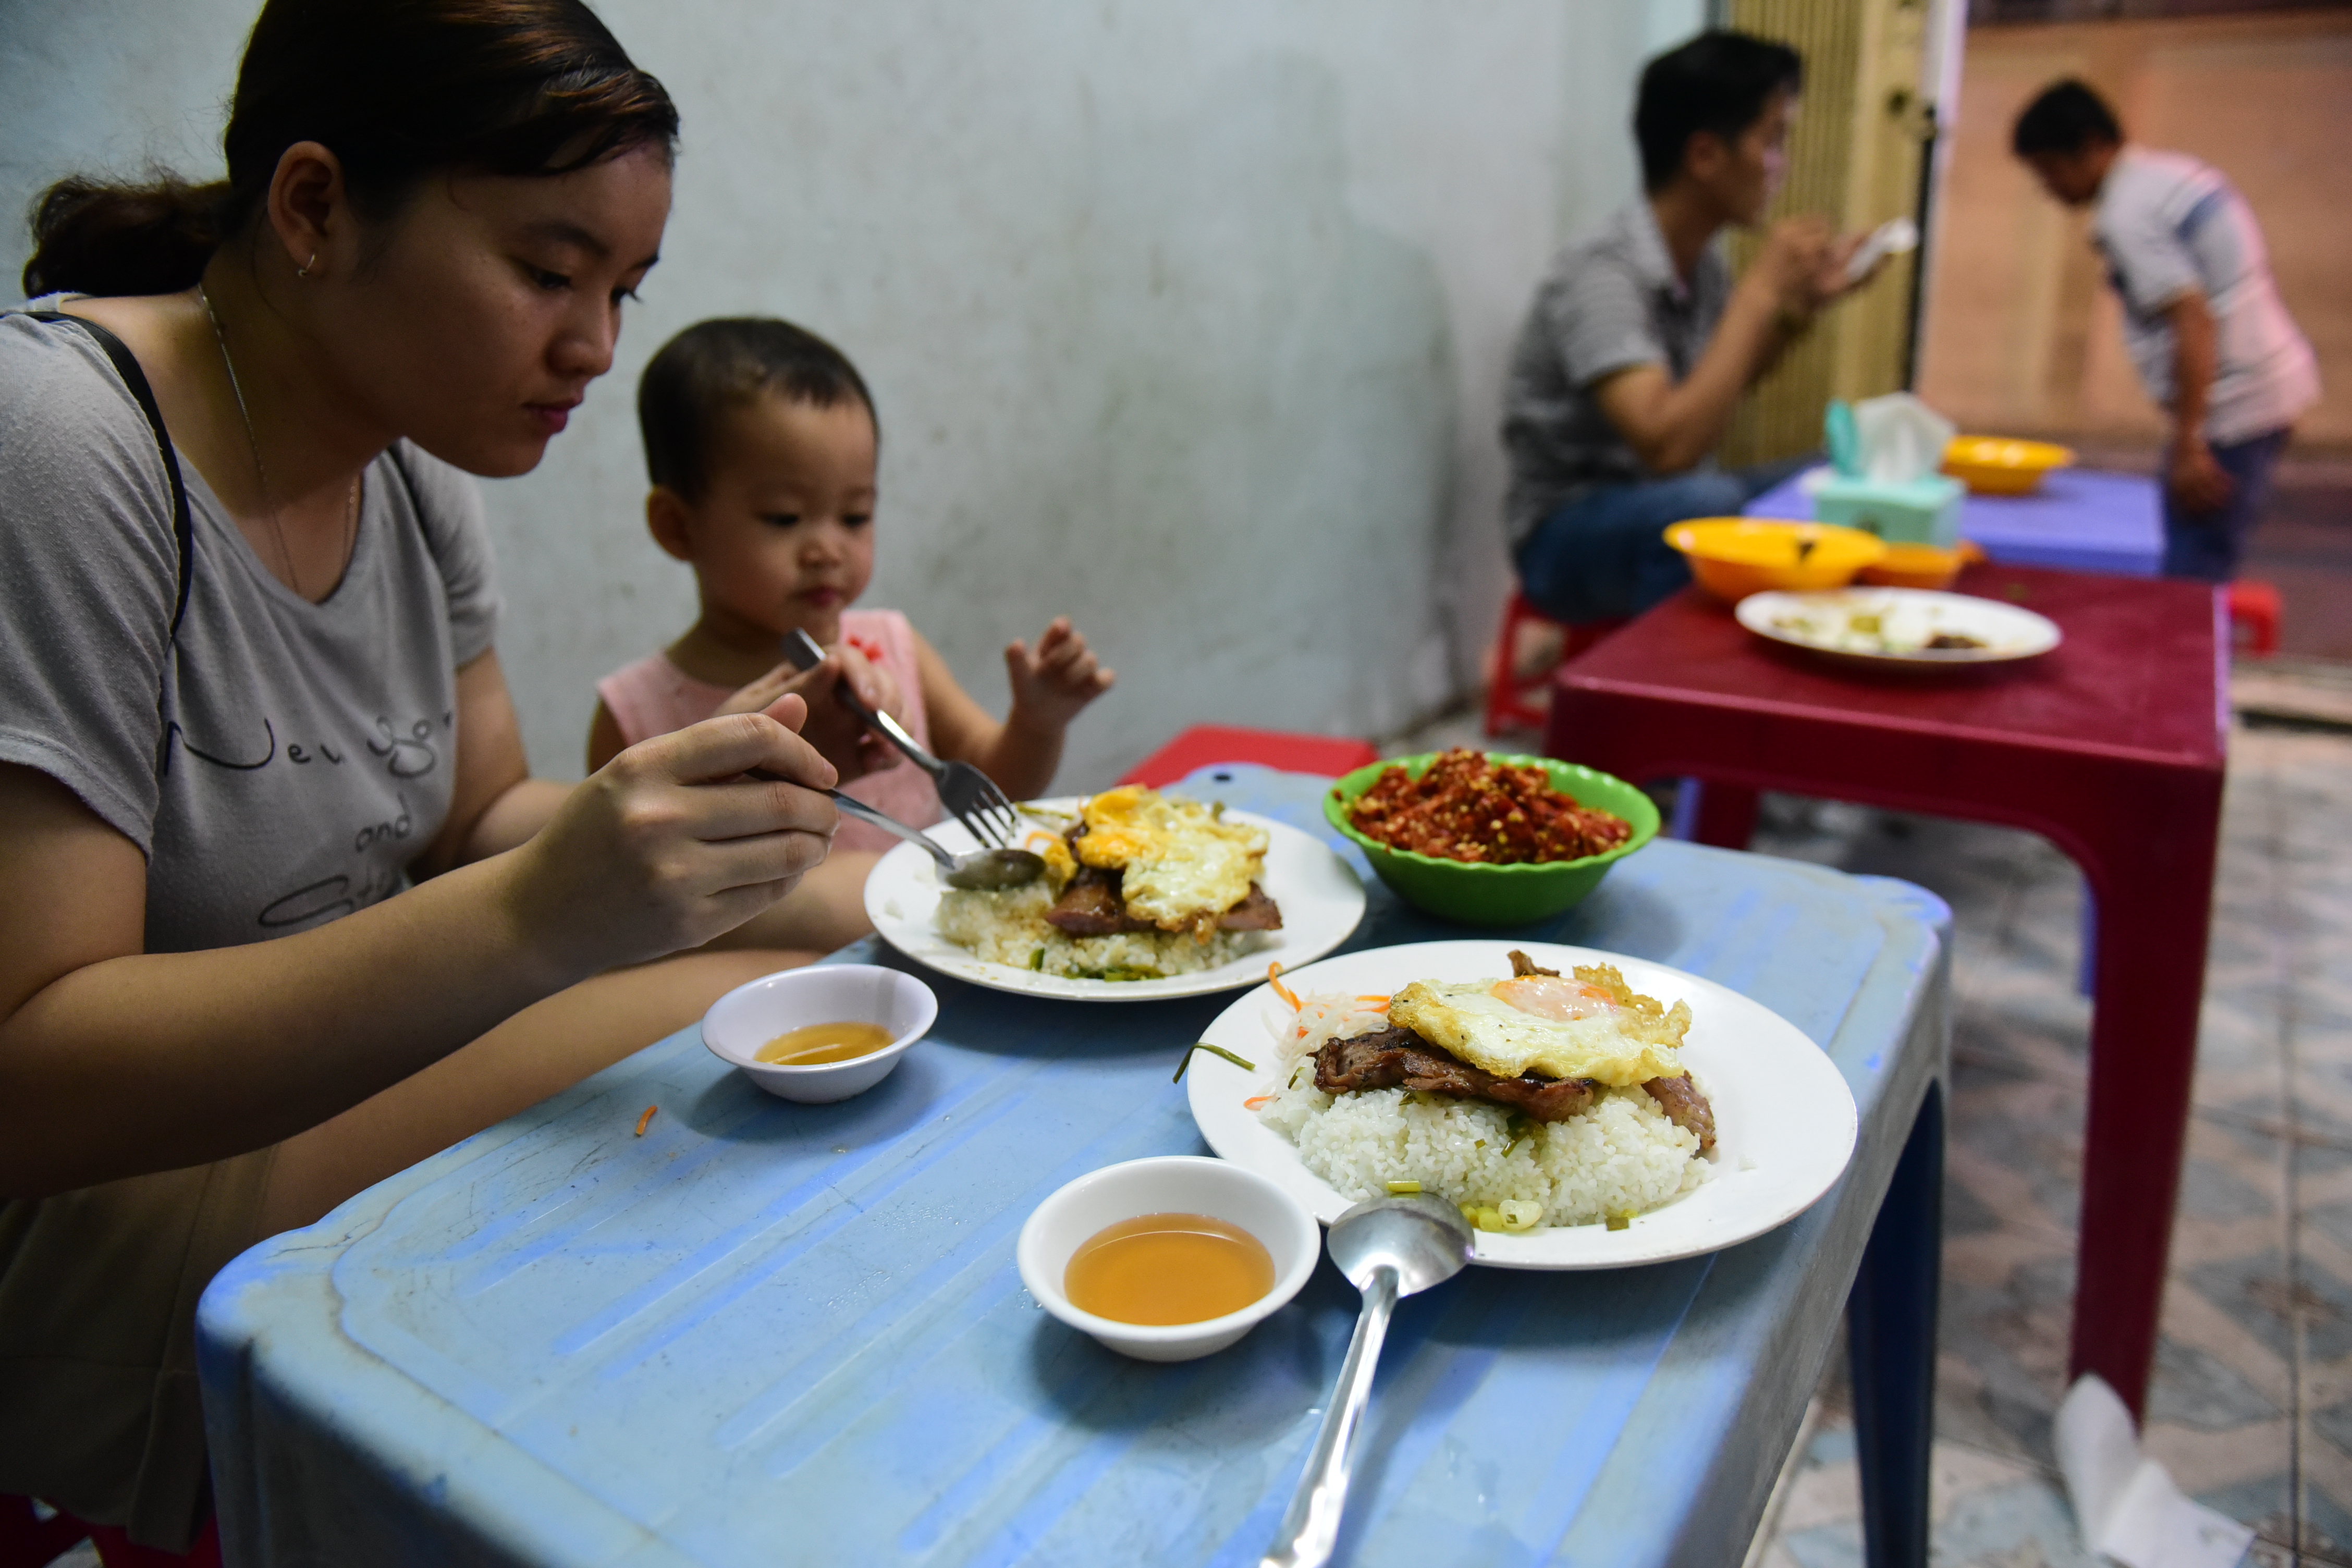 A woman and a kid are having com tam at a stall in an alley on Dinh Tien Hoang Street, Binh Thanh District in the evening. The stall opens until midnight. Photo: Quang Dinh/ Tuoi Tre